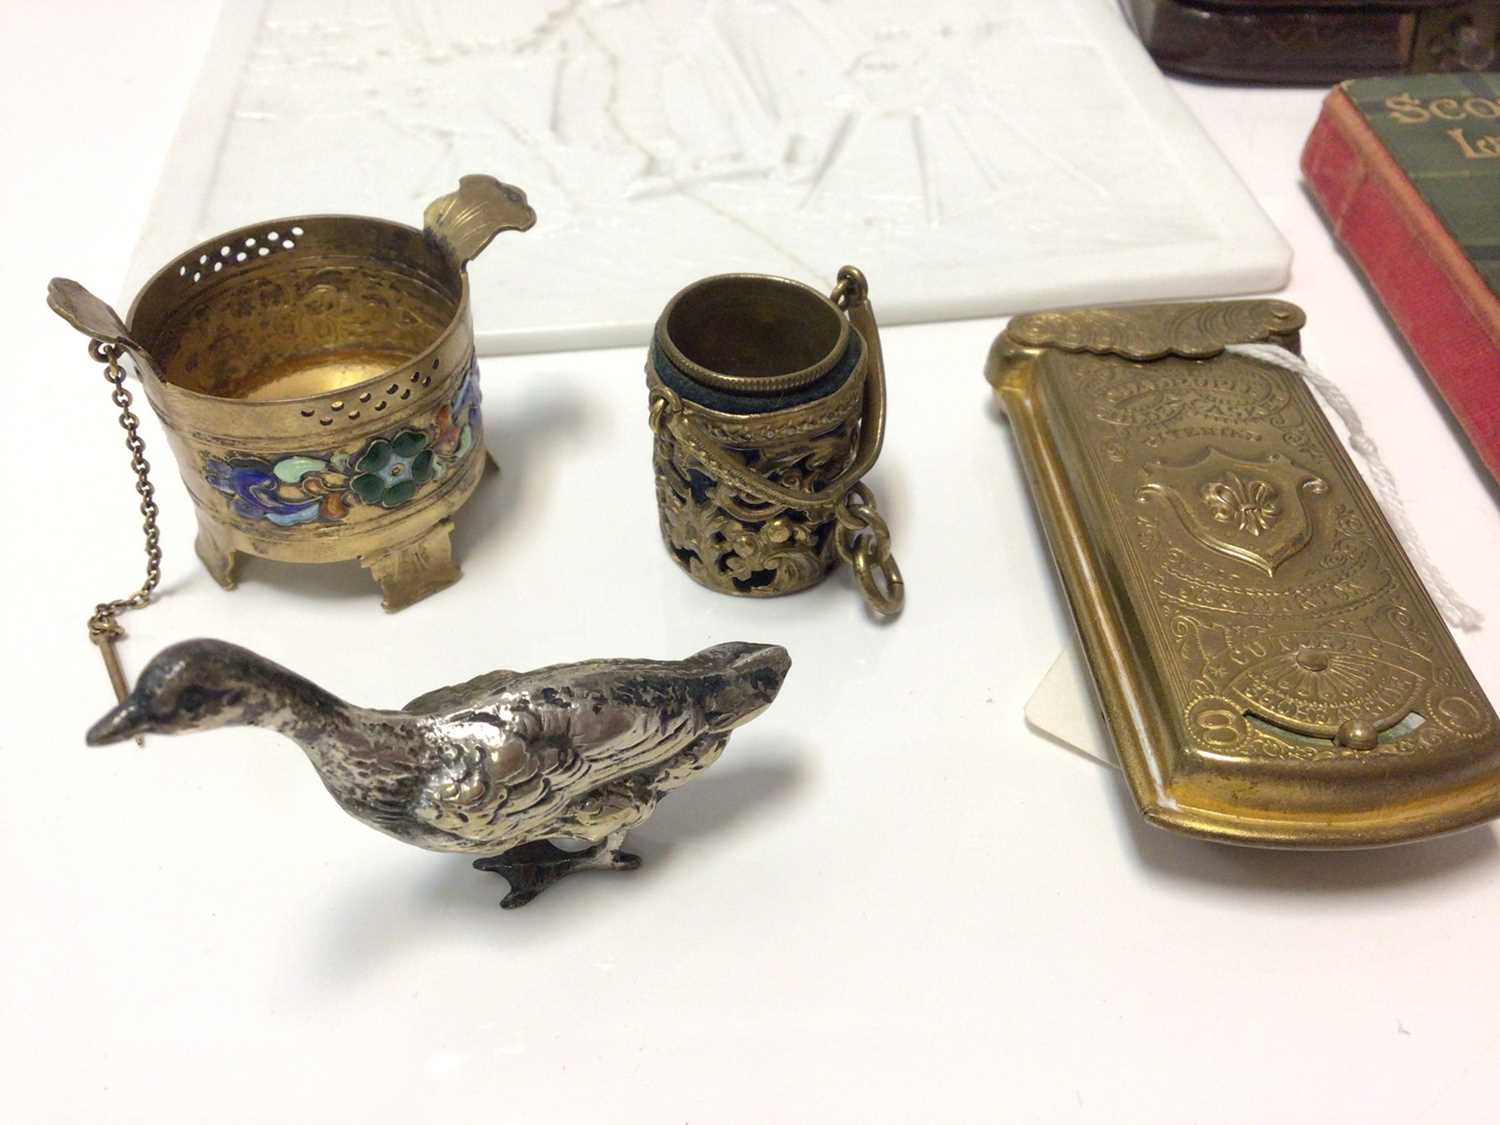 Two 19th century Lornettes, silver model goose , Eastern cosmetic box and works of art - Image 4 of 7